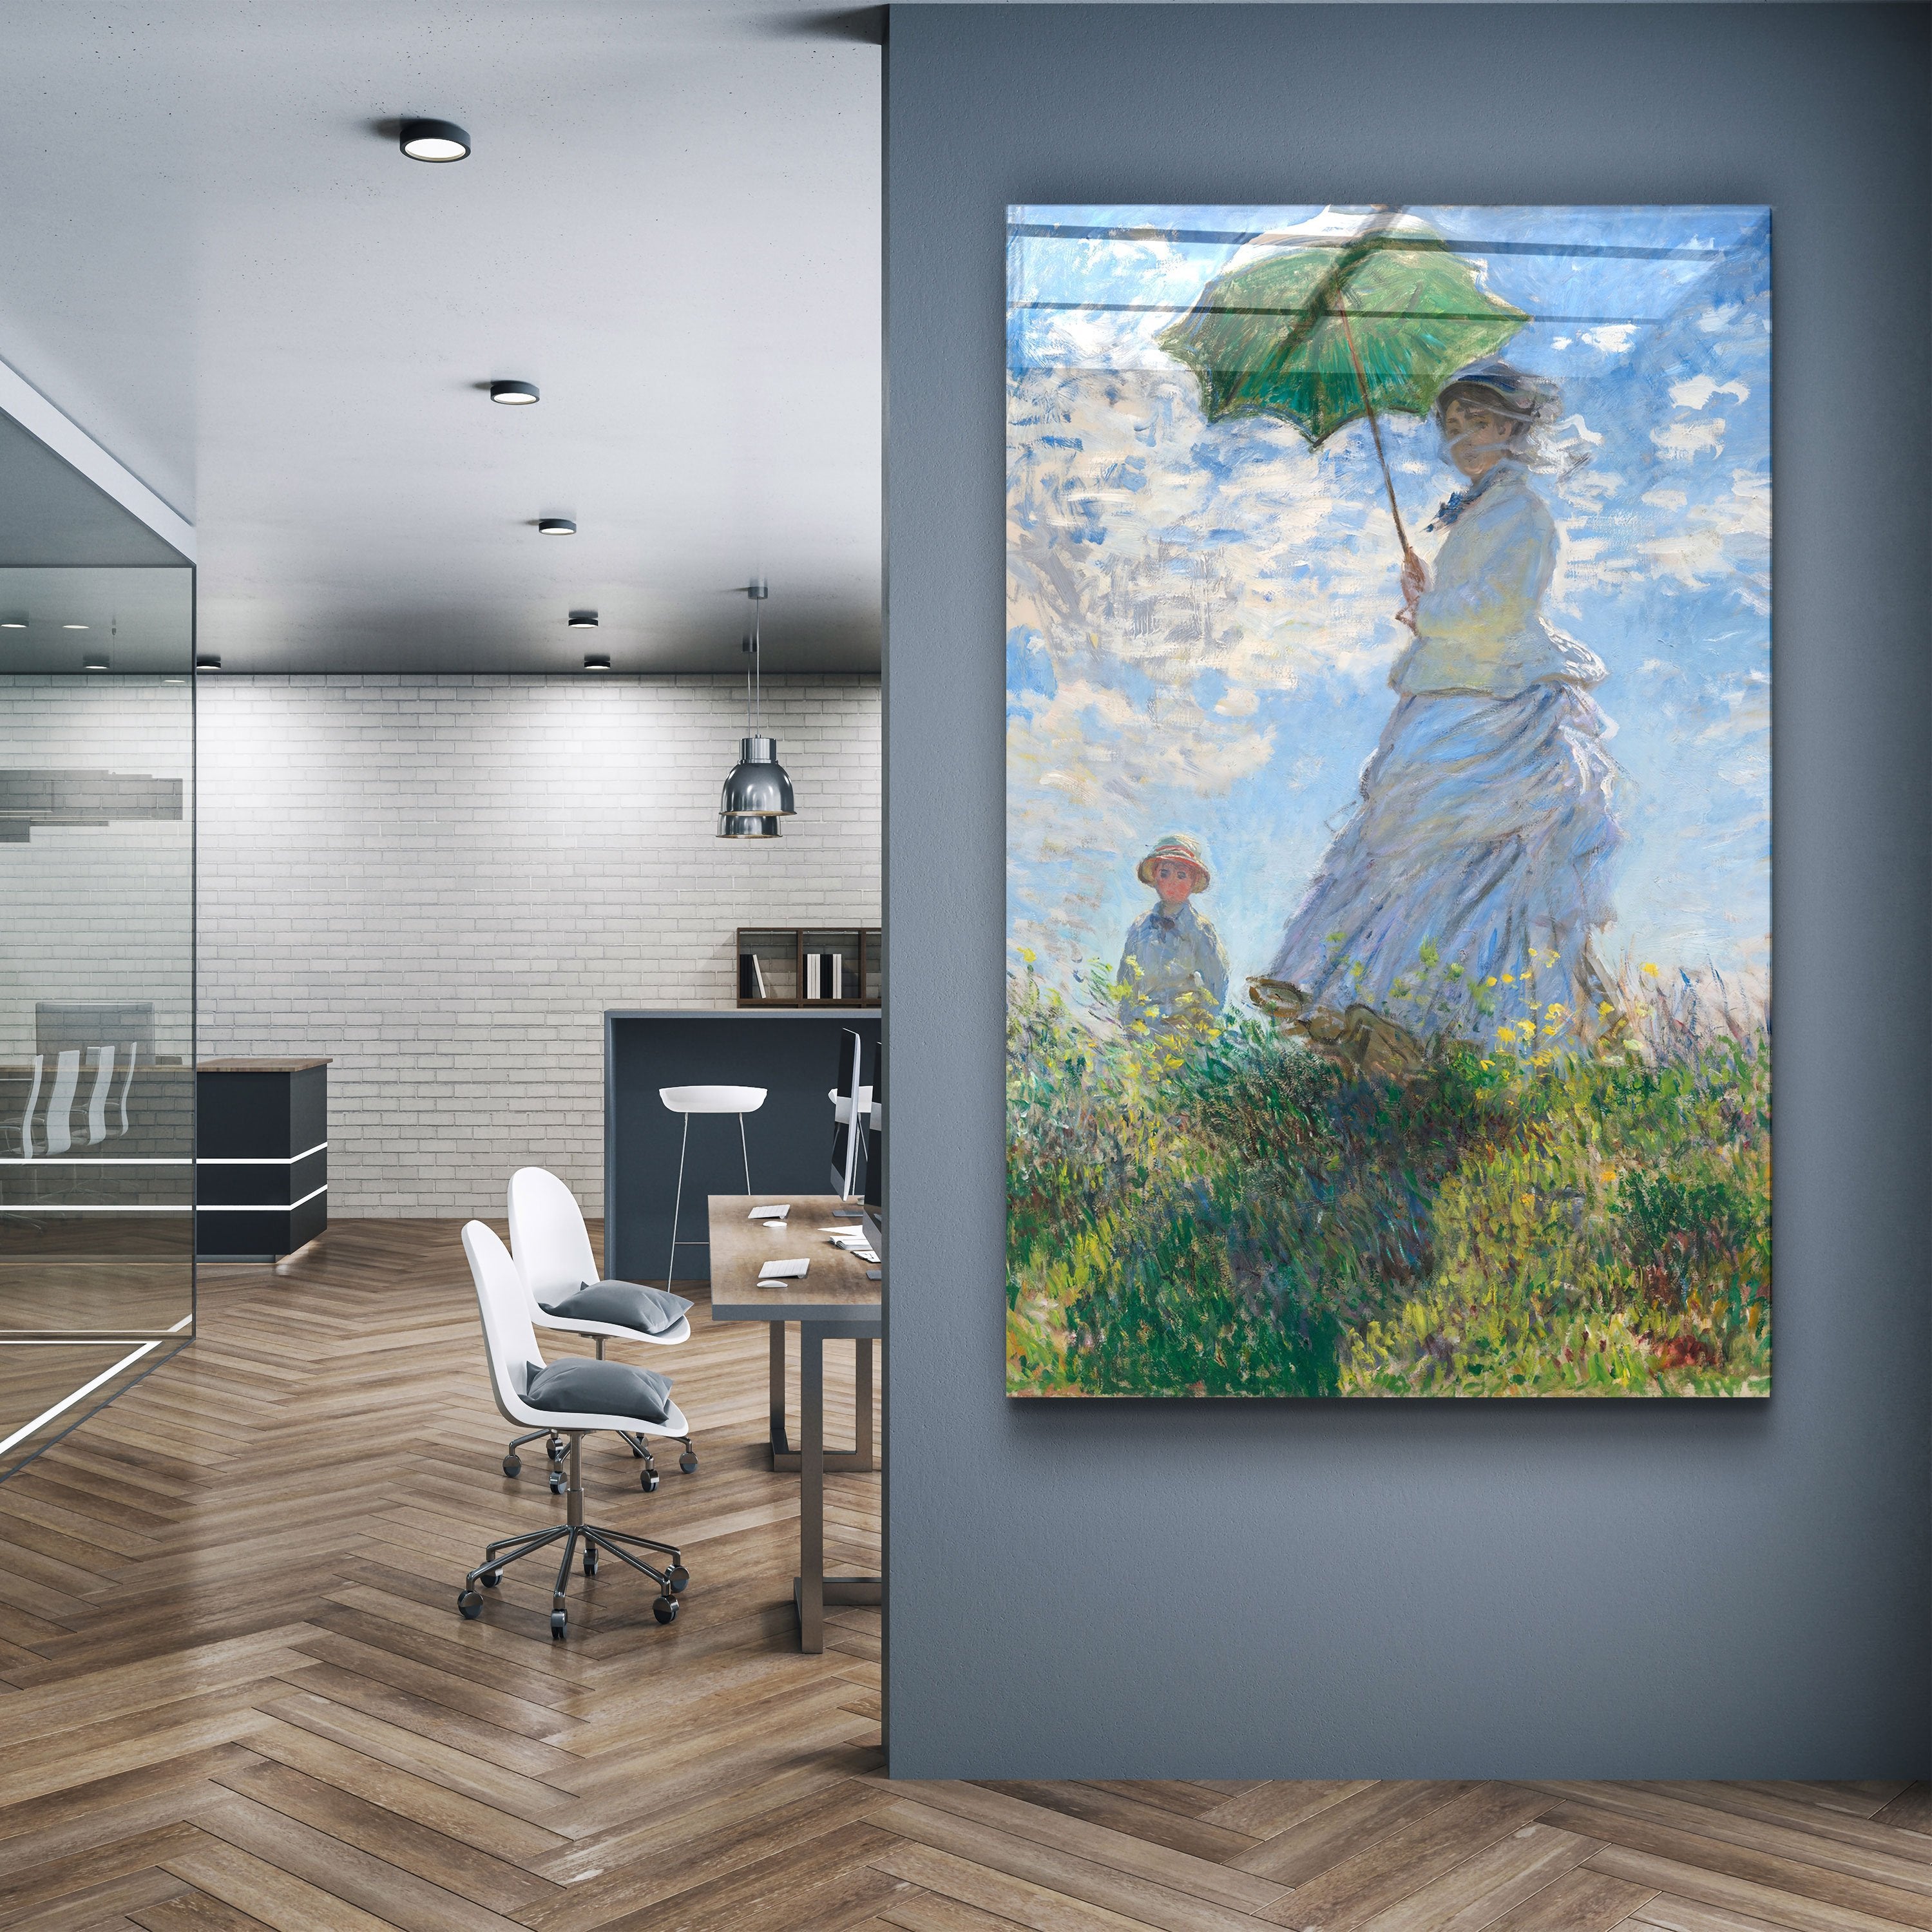 ・"Woman with a Parasol, Madame Monet and Her Son (1875) by Claude Monet"・Glass Wall Art